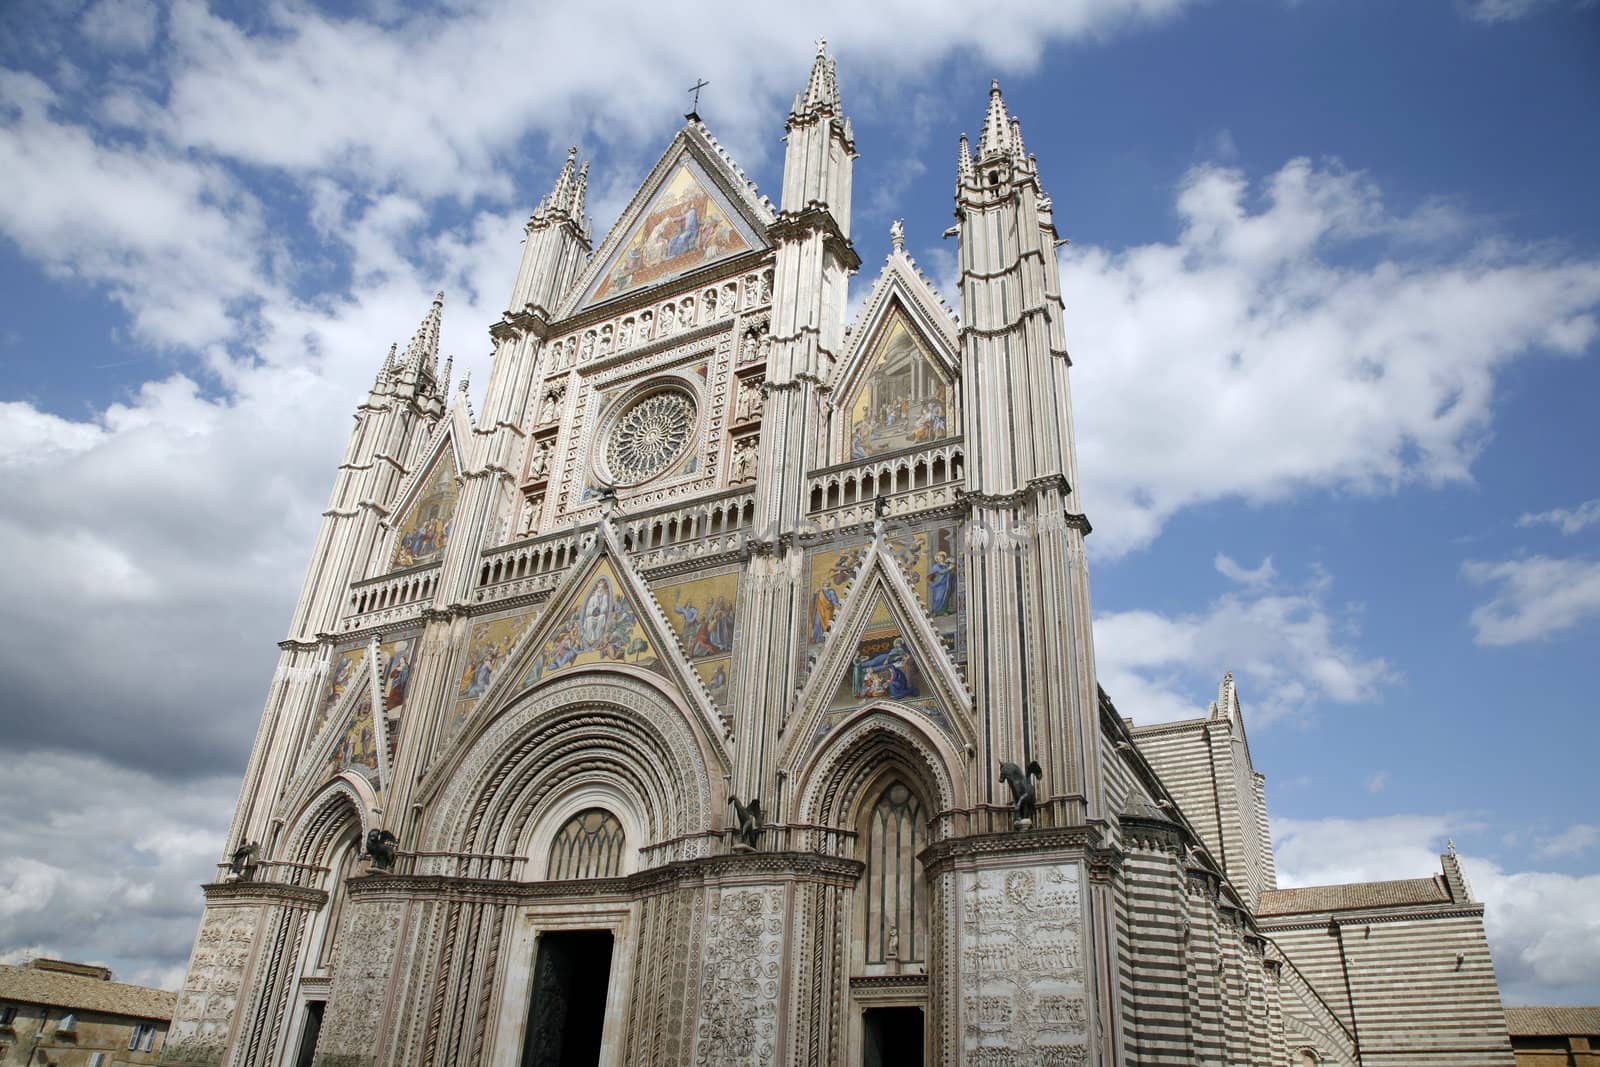 One of the most beautiful italian cathedrals. Constructed 1290 - 1600 a. c. and richly decorated with lots of stone mosaics and reliefs as well as pattern and artistic coils all over the facade.